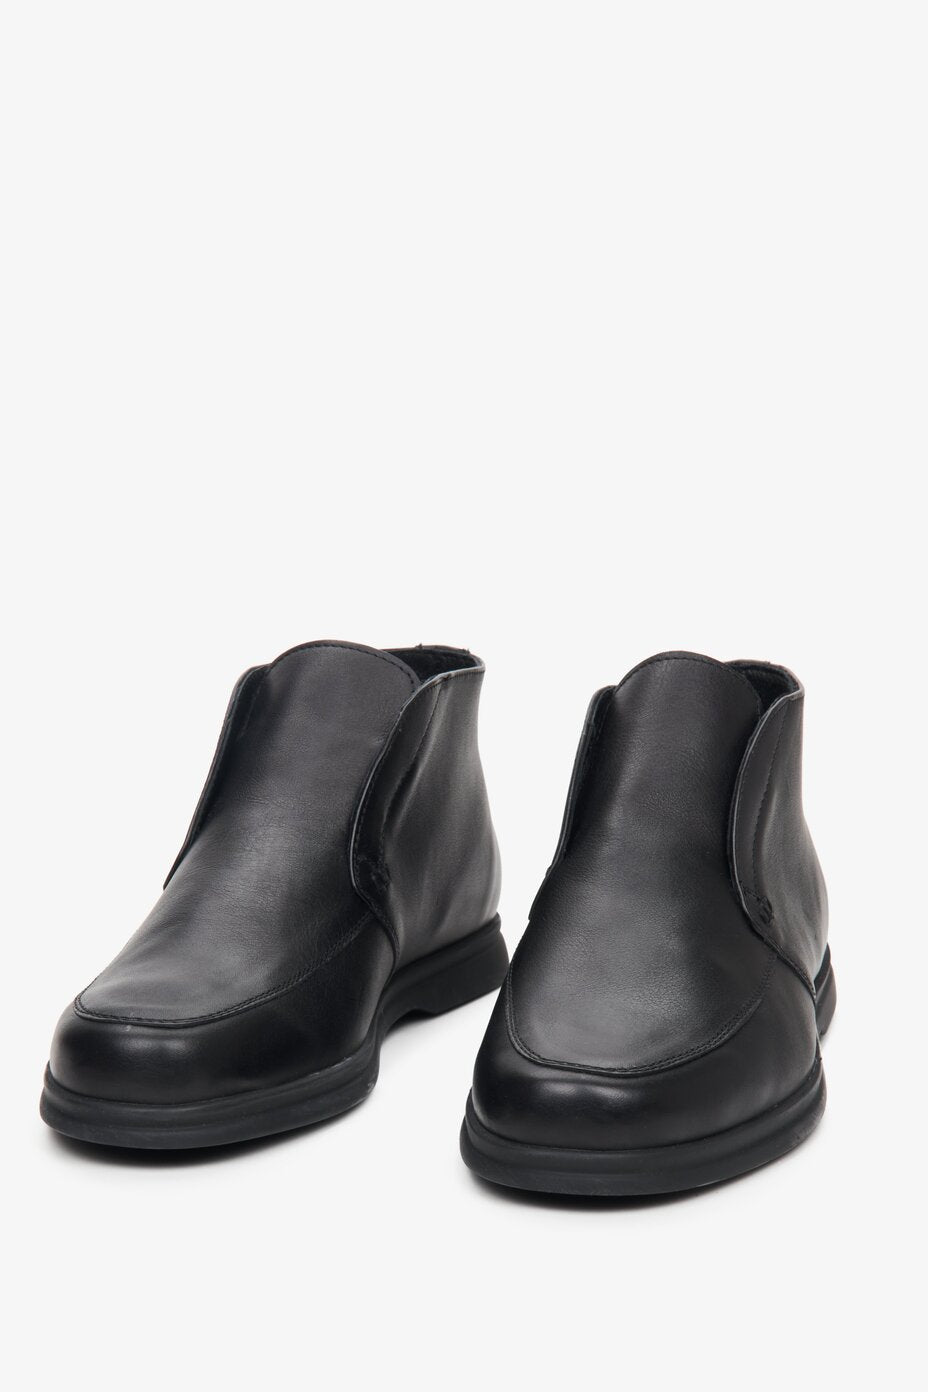 Men's Estro fall boots made of black natural leather - close-up of the front of the footwear.